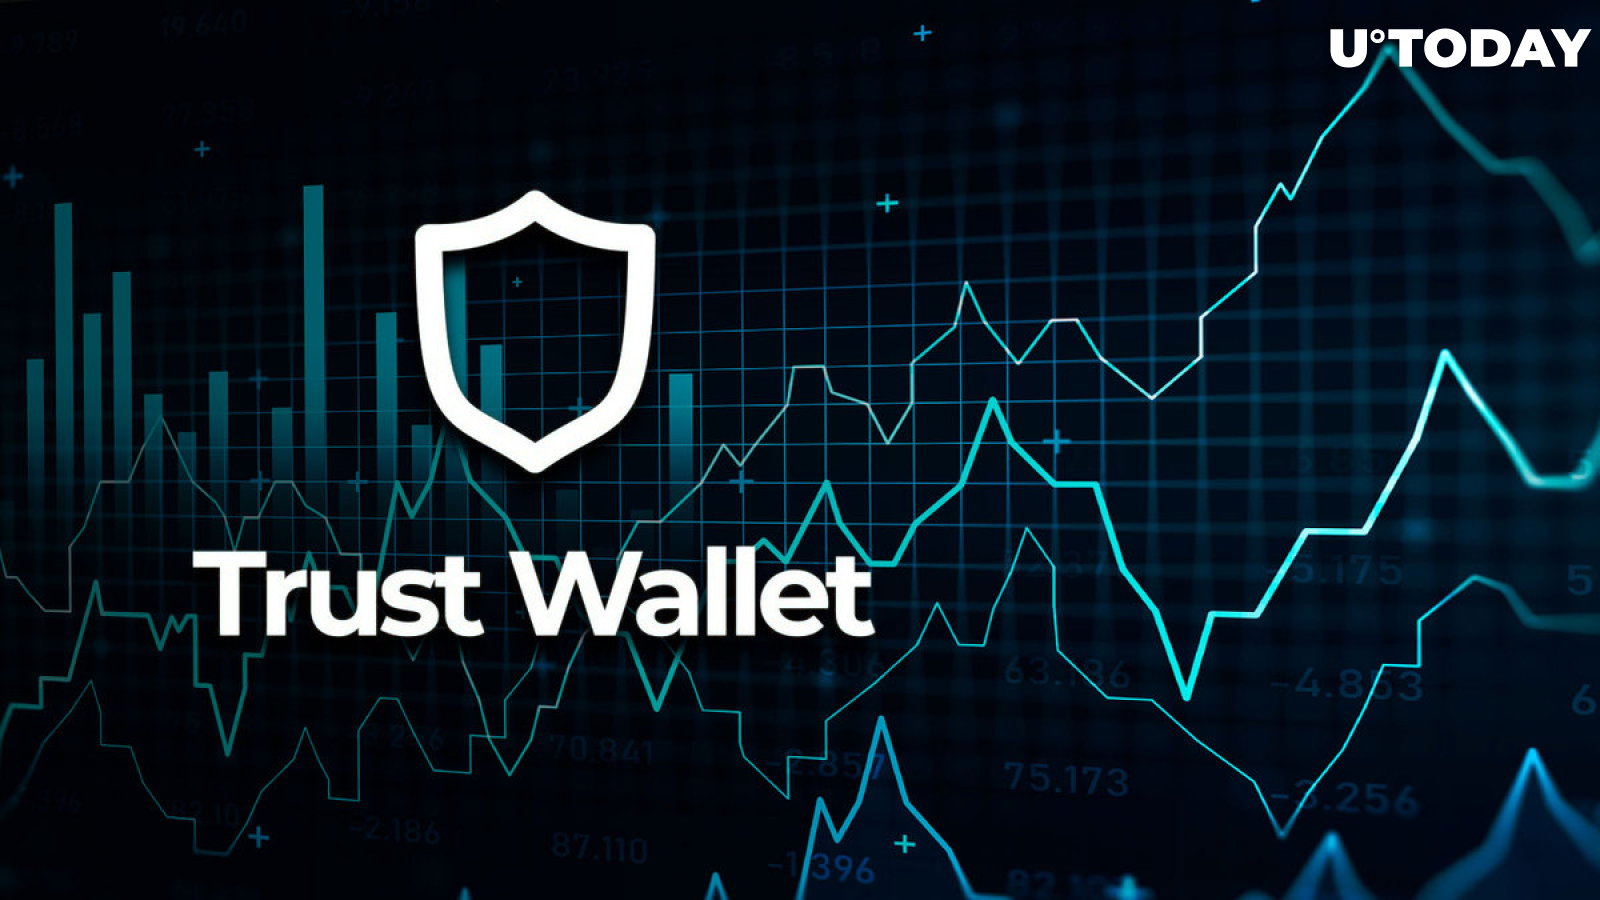 Trust Wallet Token Jumps 43% to Set New ATH, Here's Why